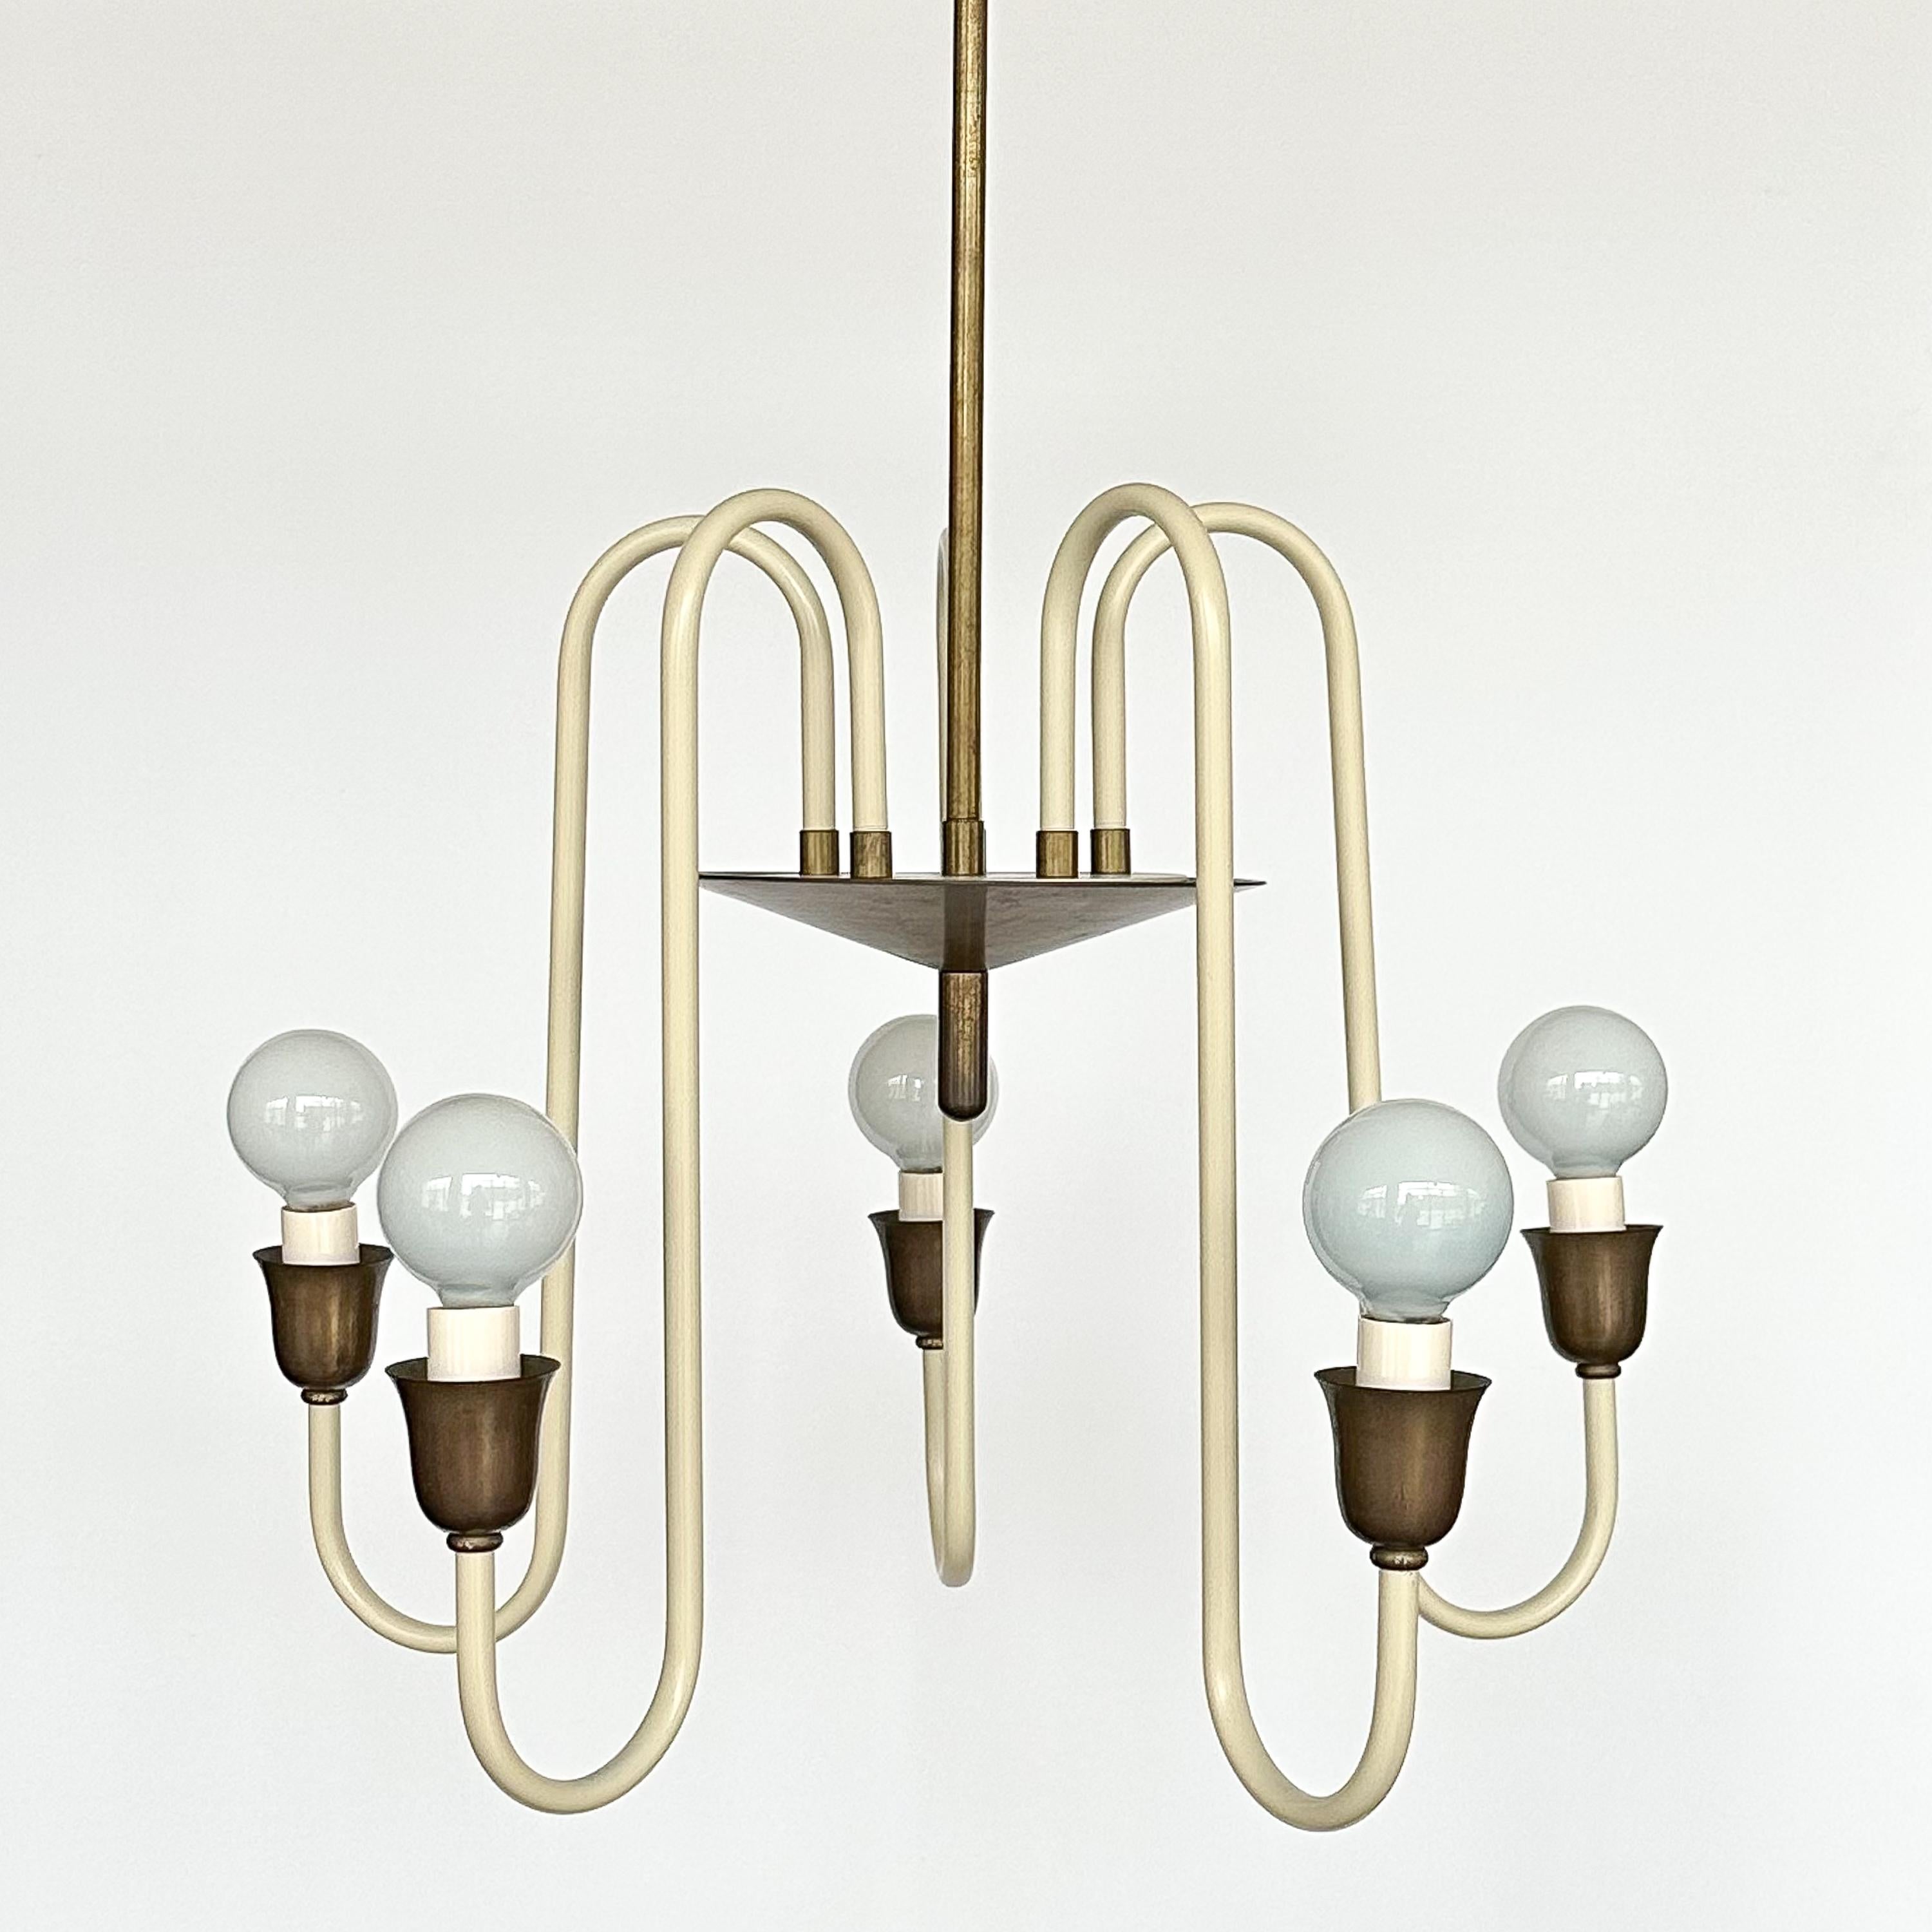 Mid-20th Century French 1950s Cream Lacquered and Brass 5 Light Chandelier